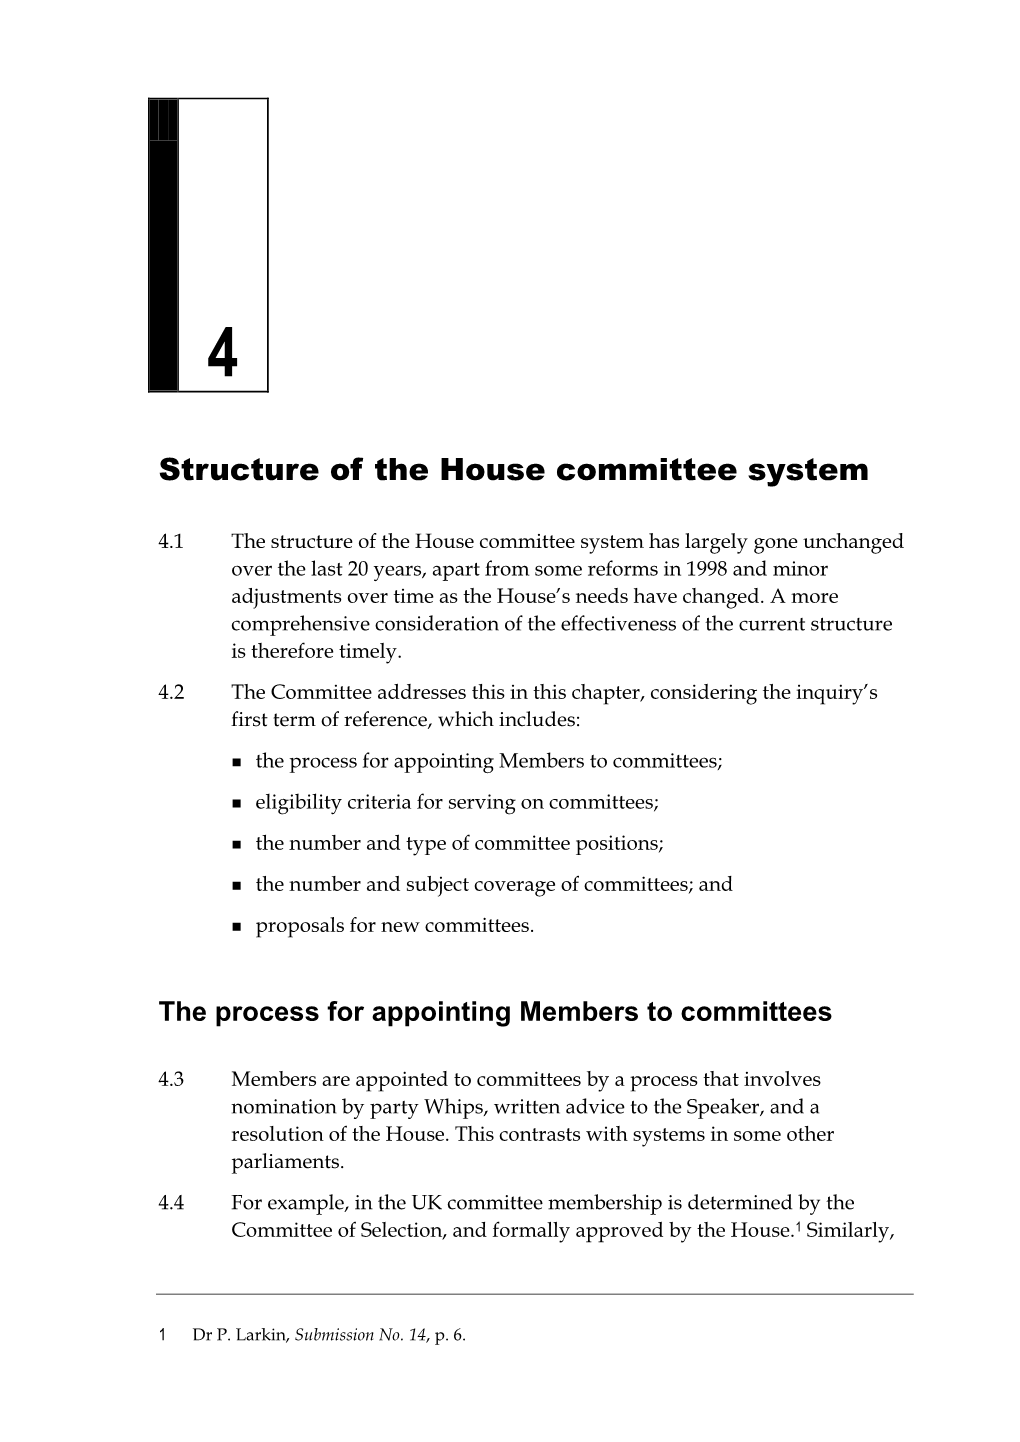 Chapter 4: Structure of the House Committee